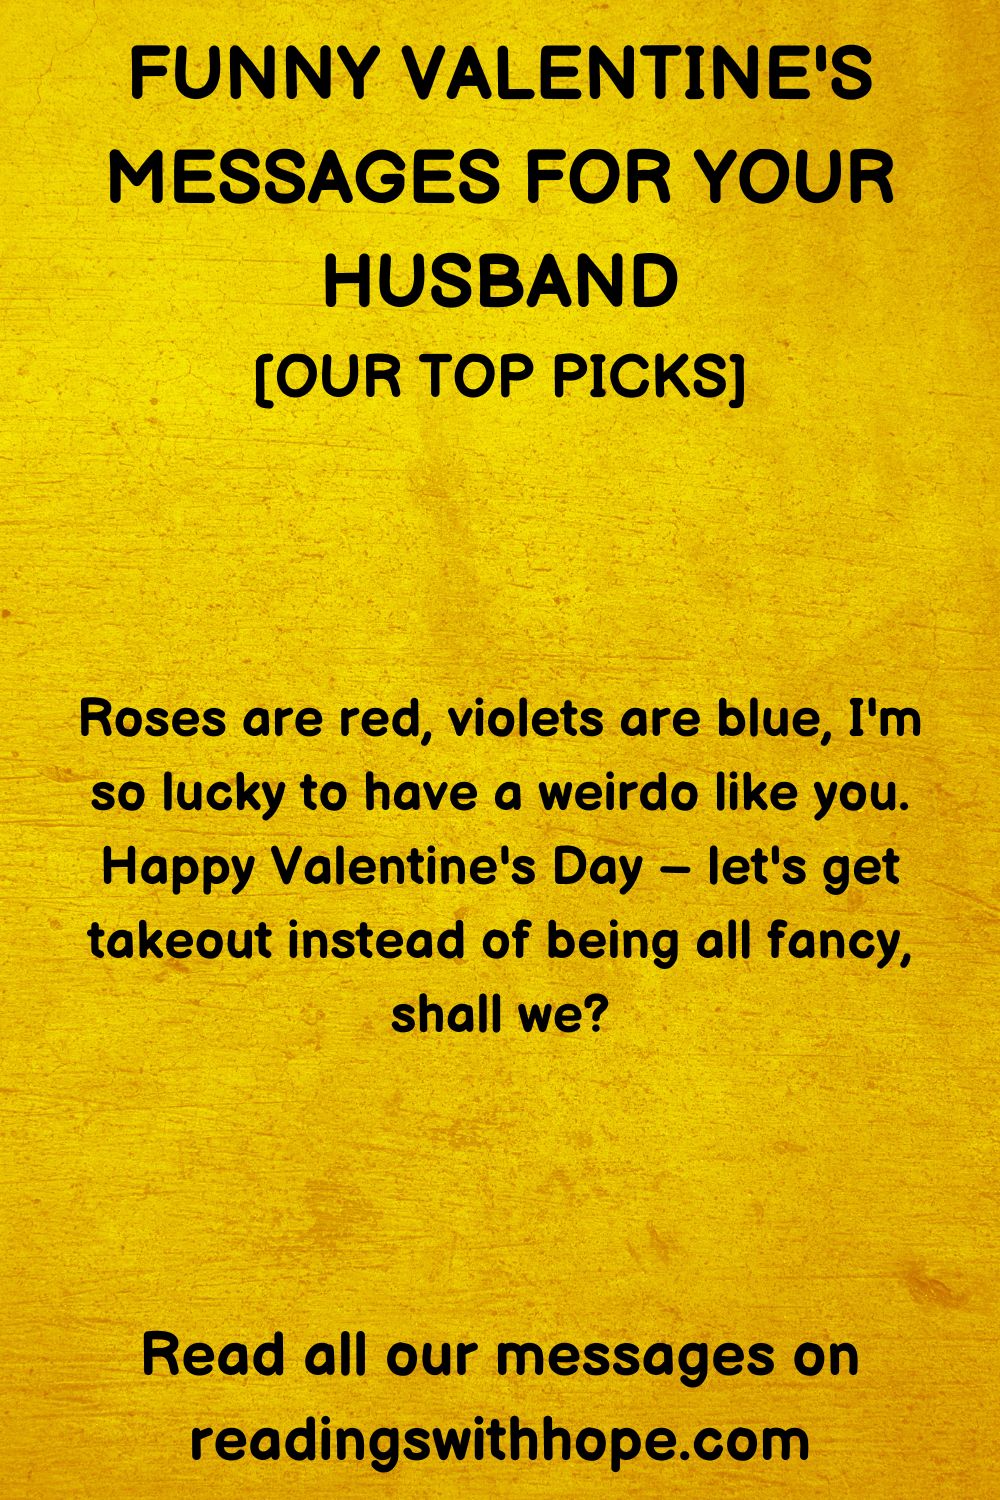 Funny Valentine's Day Message for your Husband